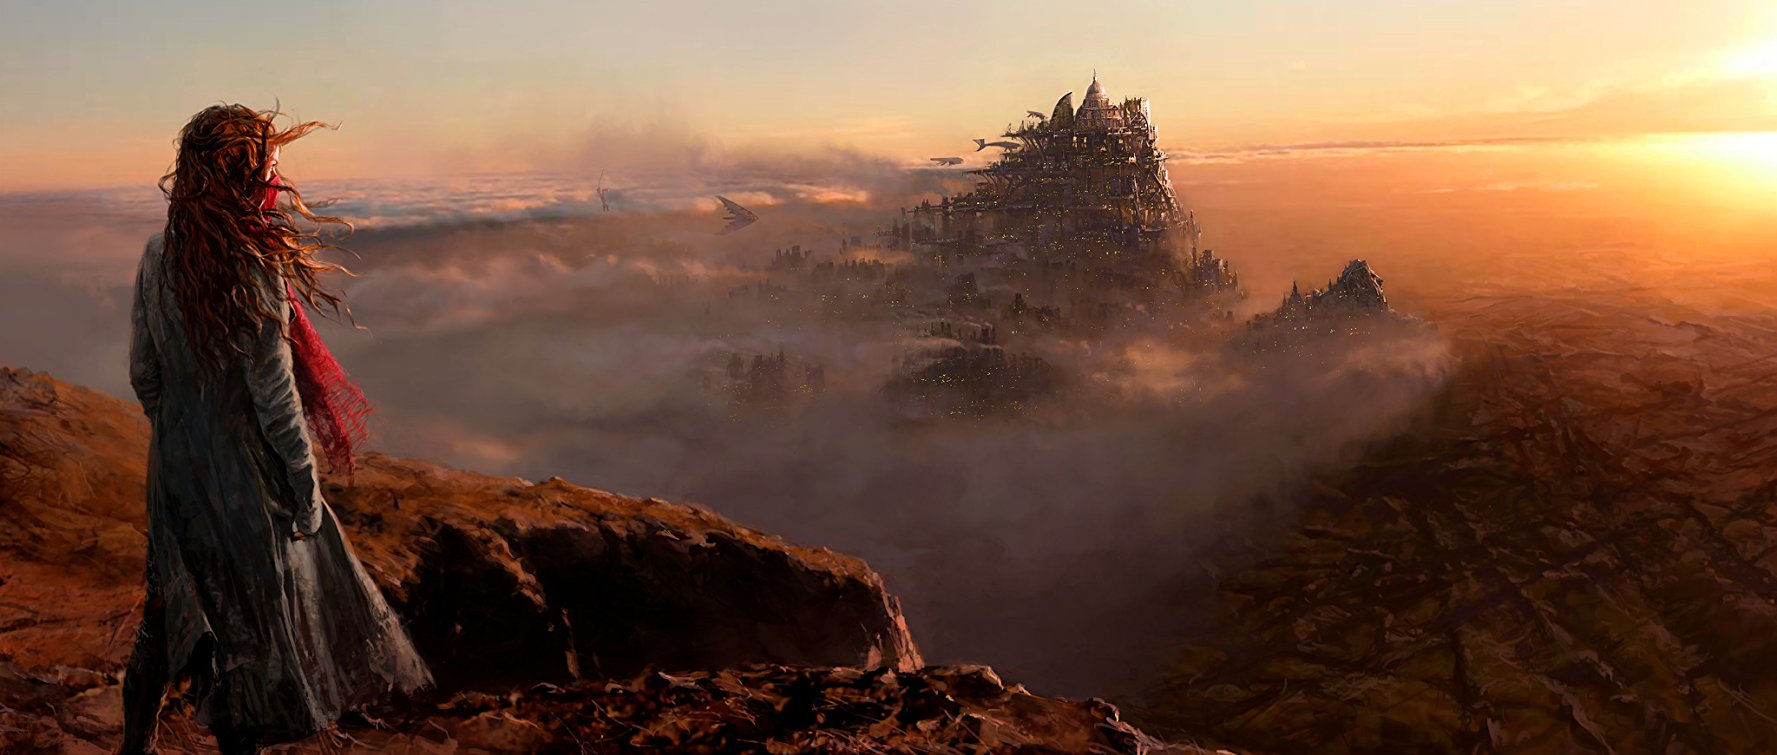 ‘mortal engines’ at nycc: peter jackson’s steampunk epic a long way from middle earth